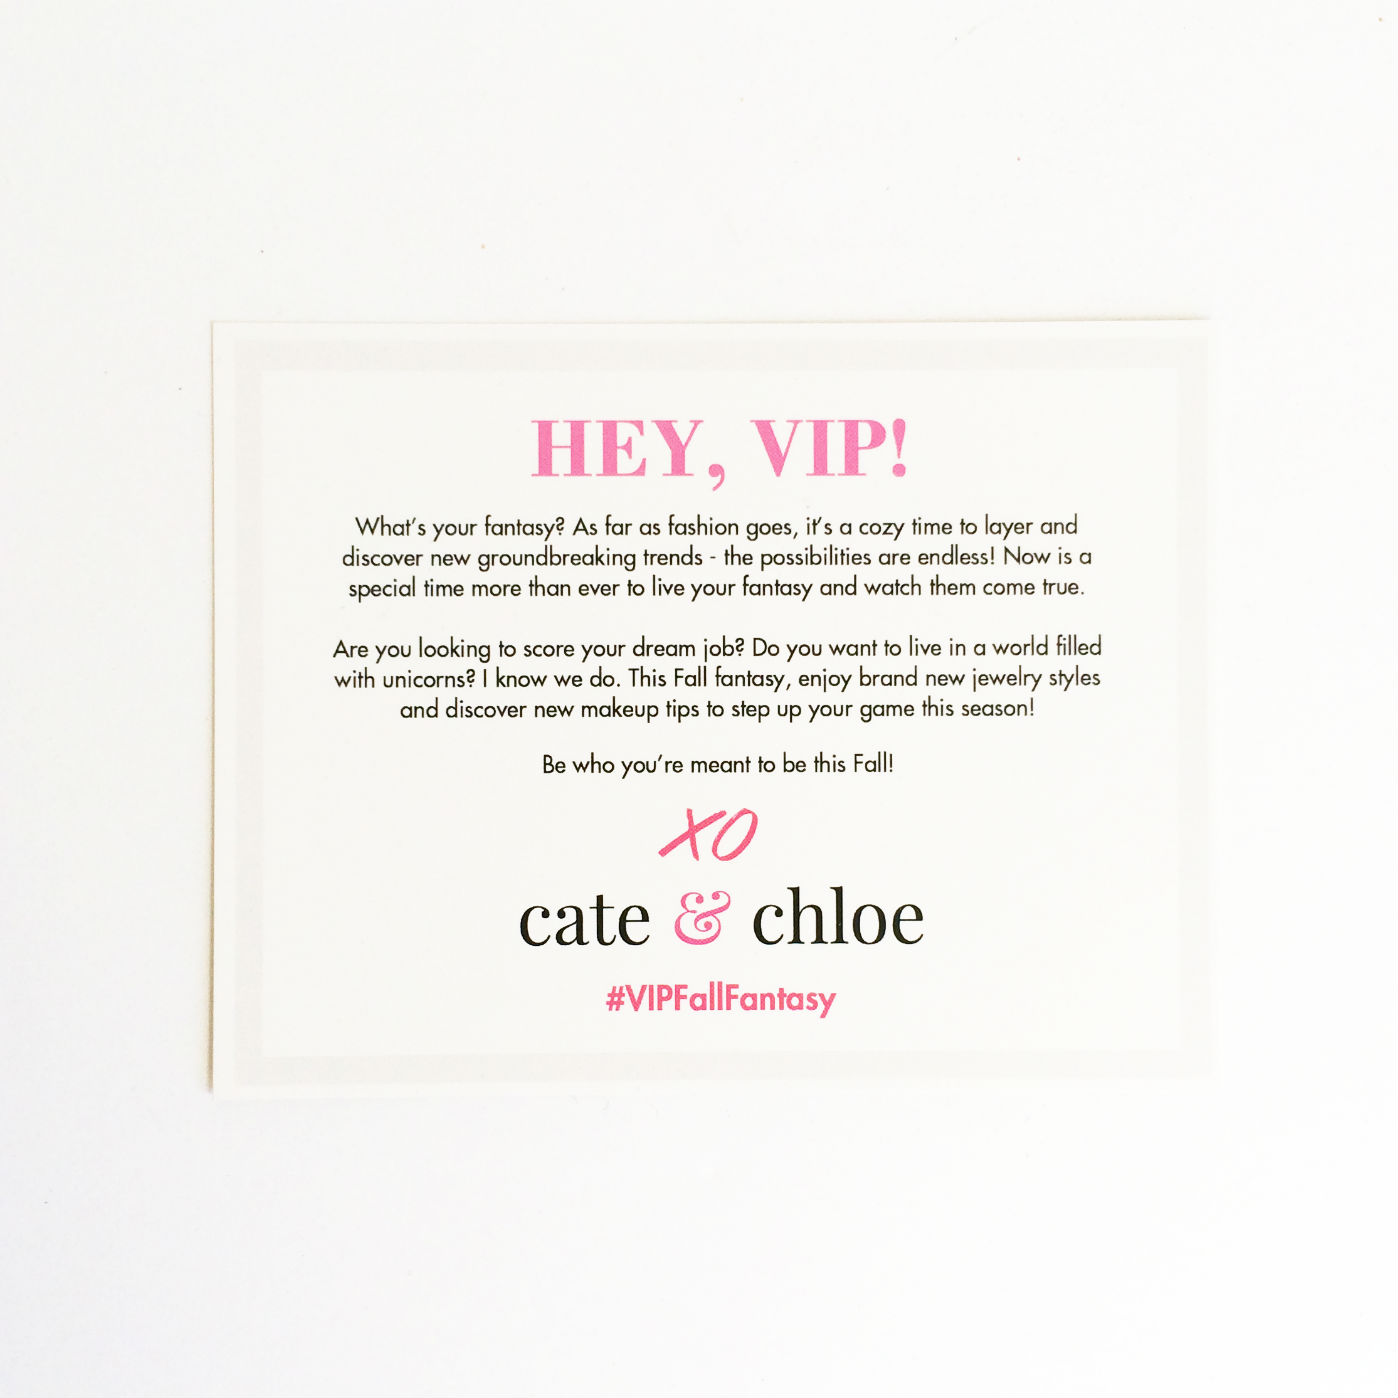 See what treasures are inside the Cate & Chloe VIP box with our review!